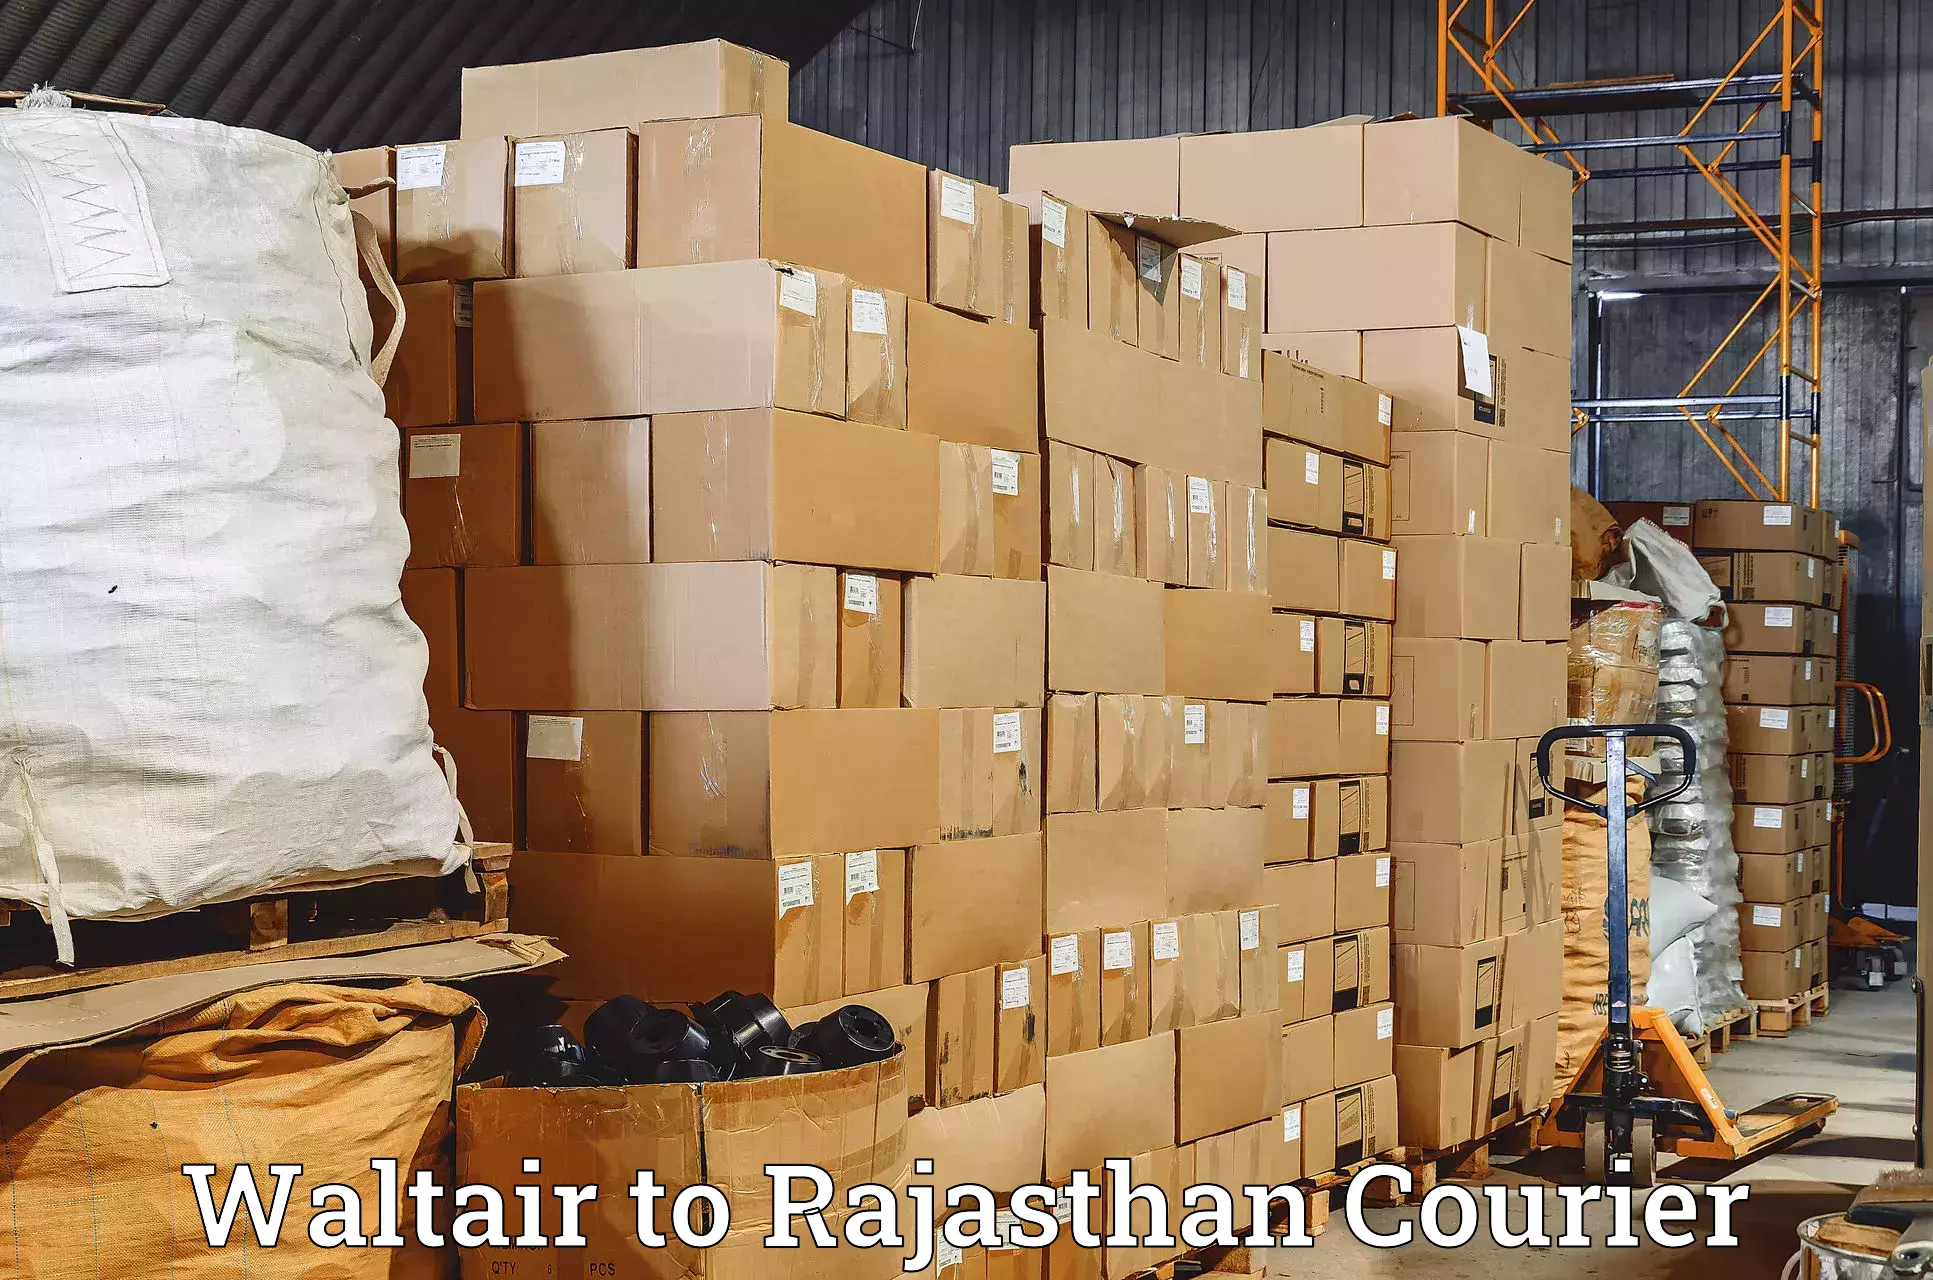 Courier service innovation Waltair to Sultana